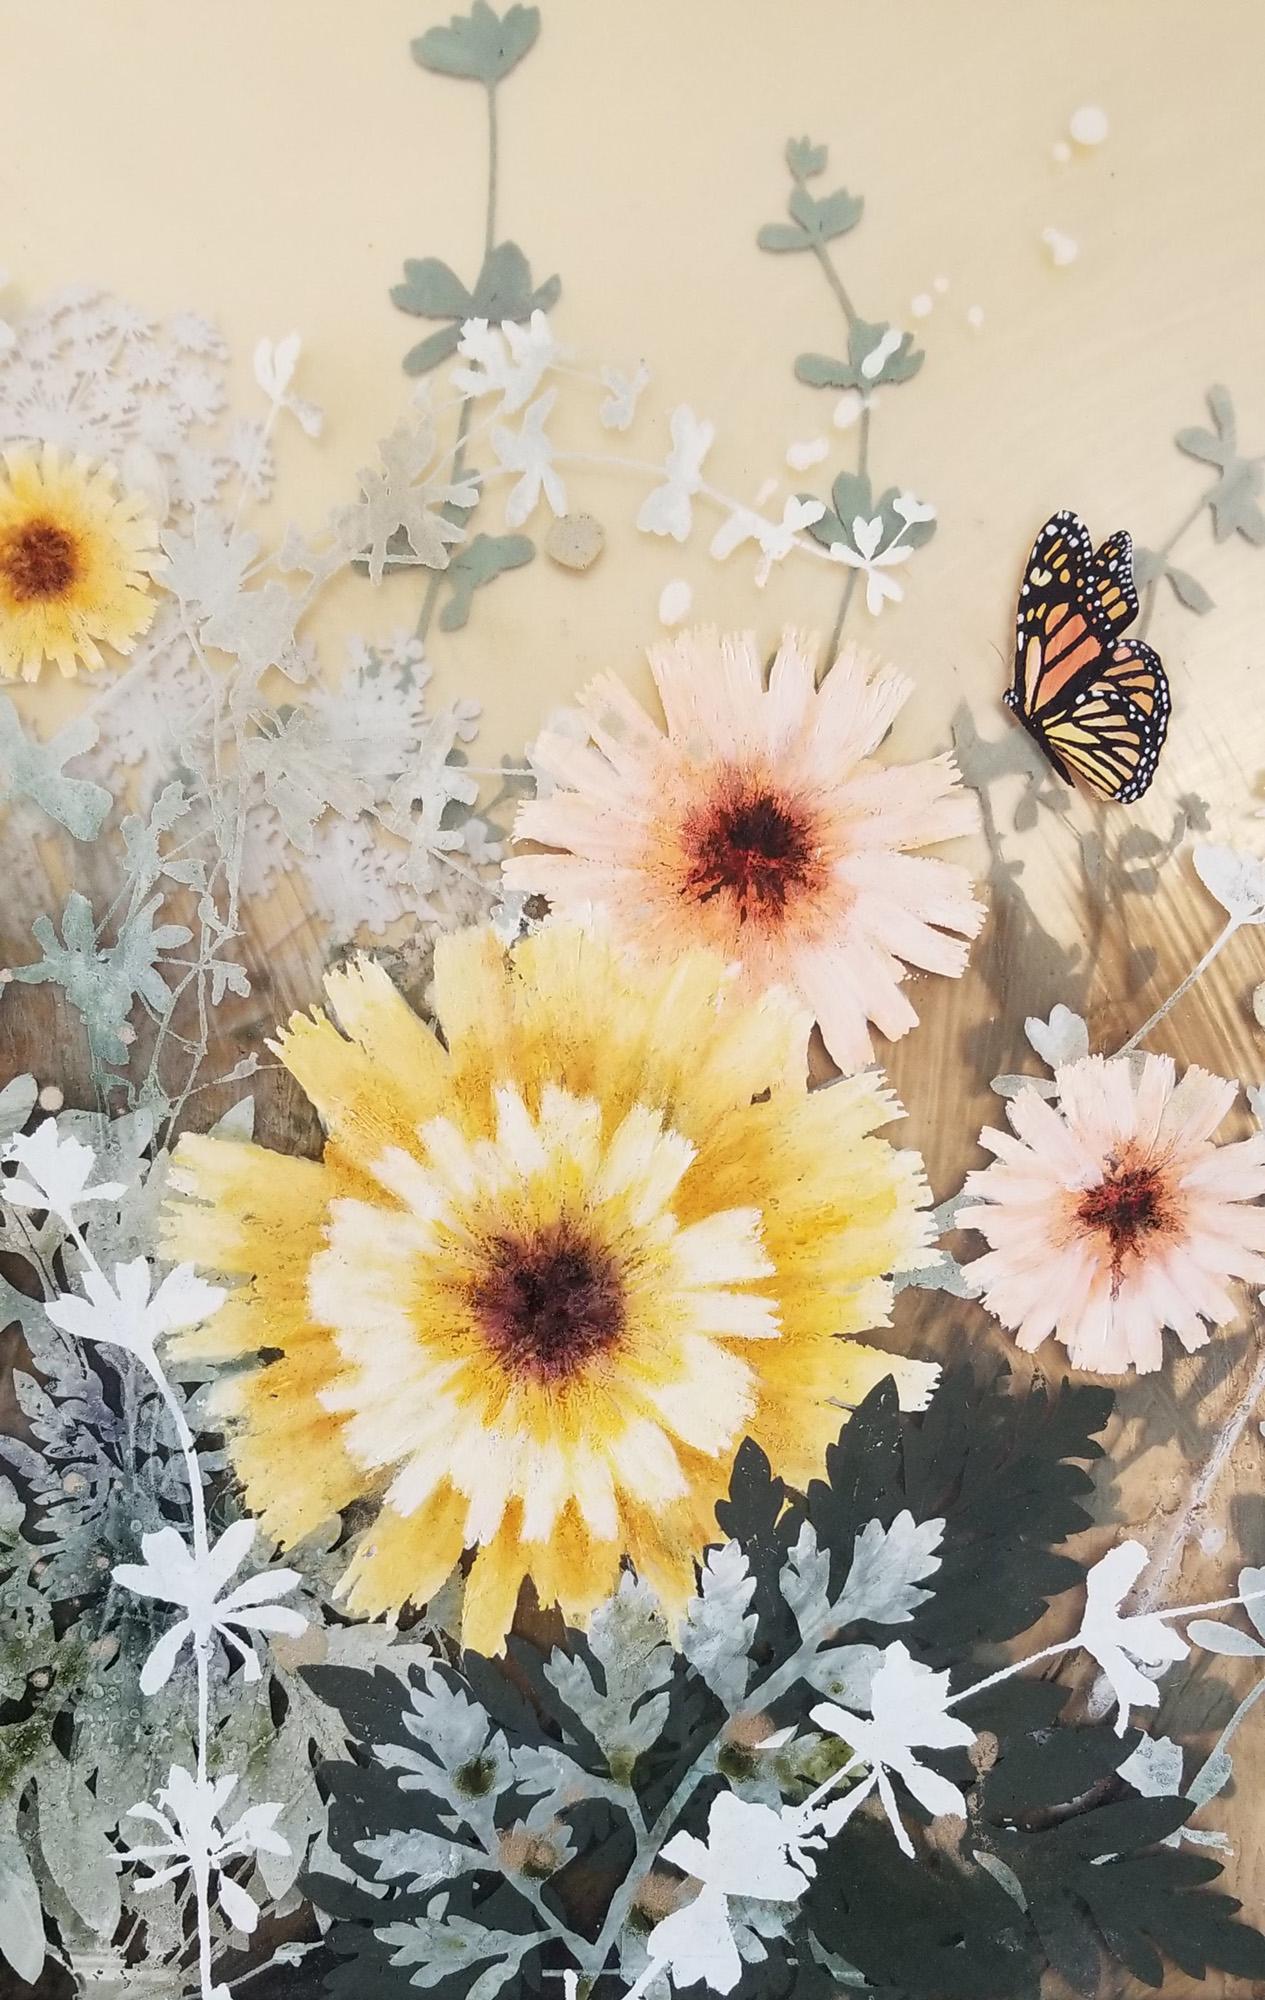 This beautiful floral triptych on acrylic is by Cara Enteles. Her work is motivated by a fascination with nature and a concern for the environment. She splits her time between NYC and rural northeast Pennsylvania, where she keeps a large organic